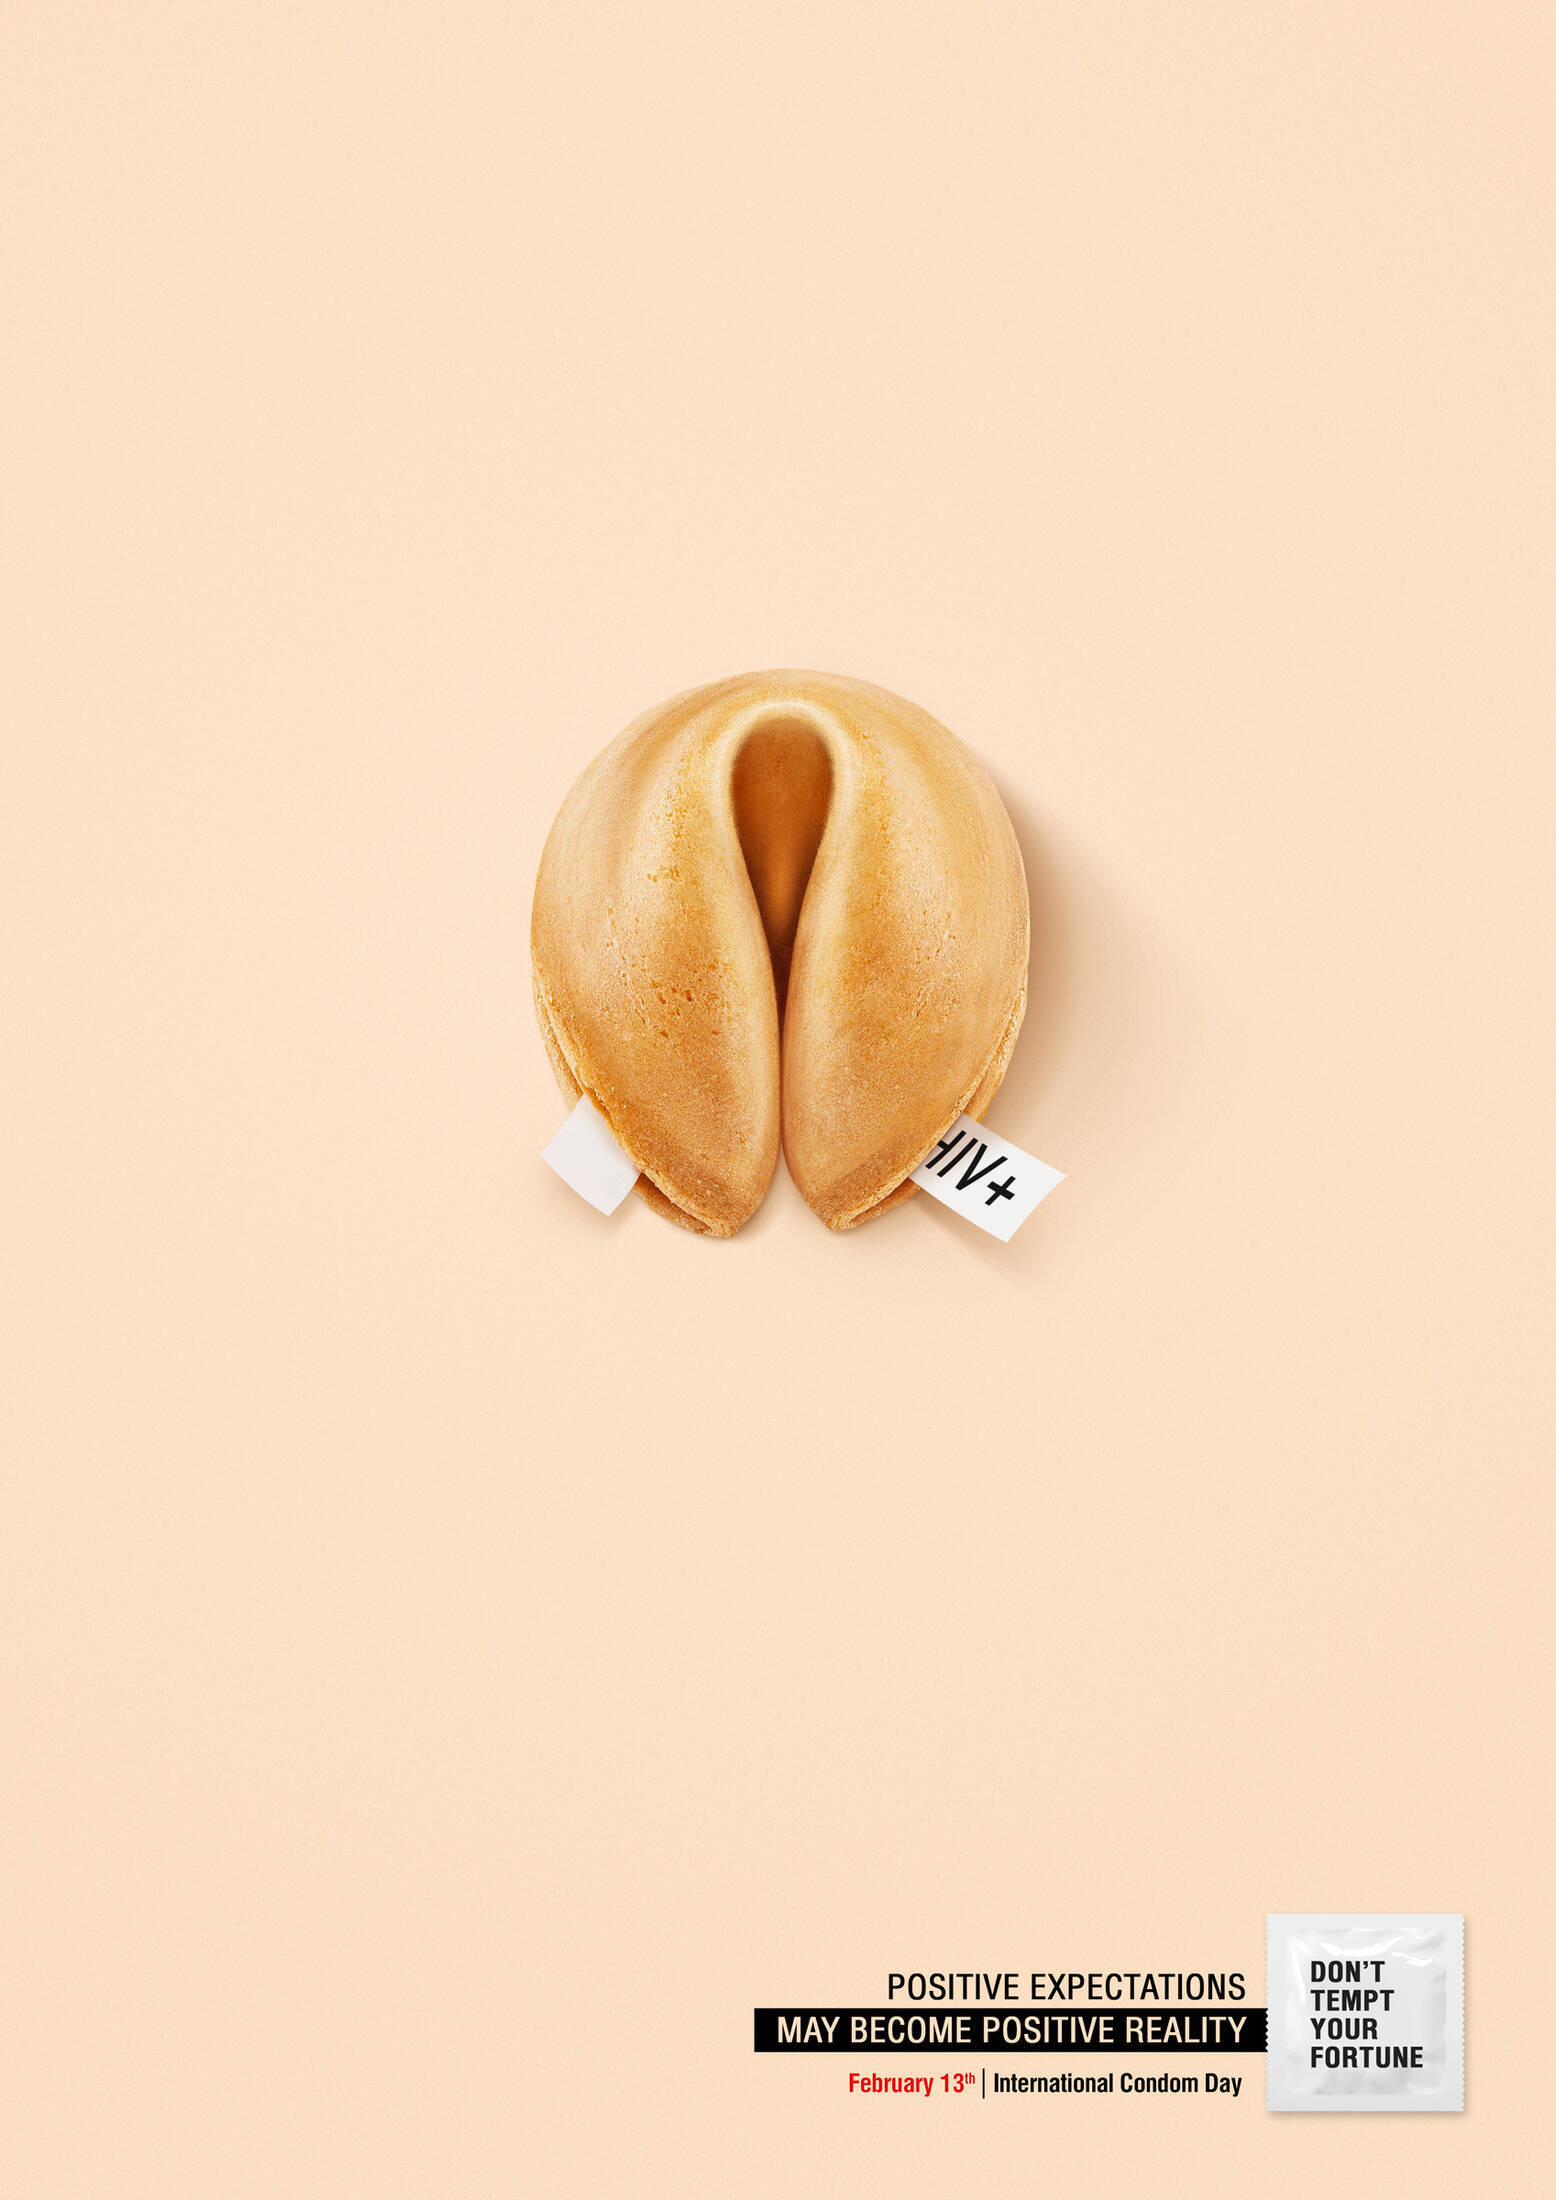 Fortune cookie - She, Fortune cookie - He AD